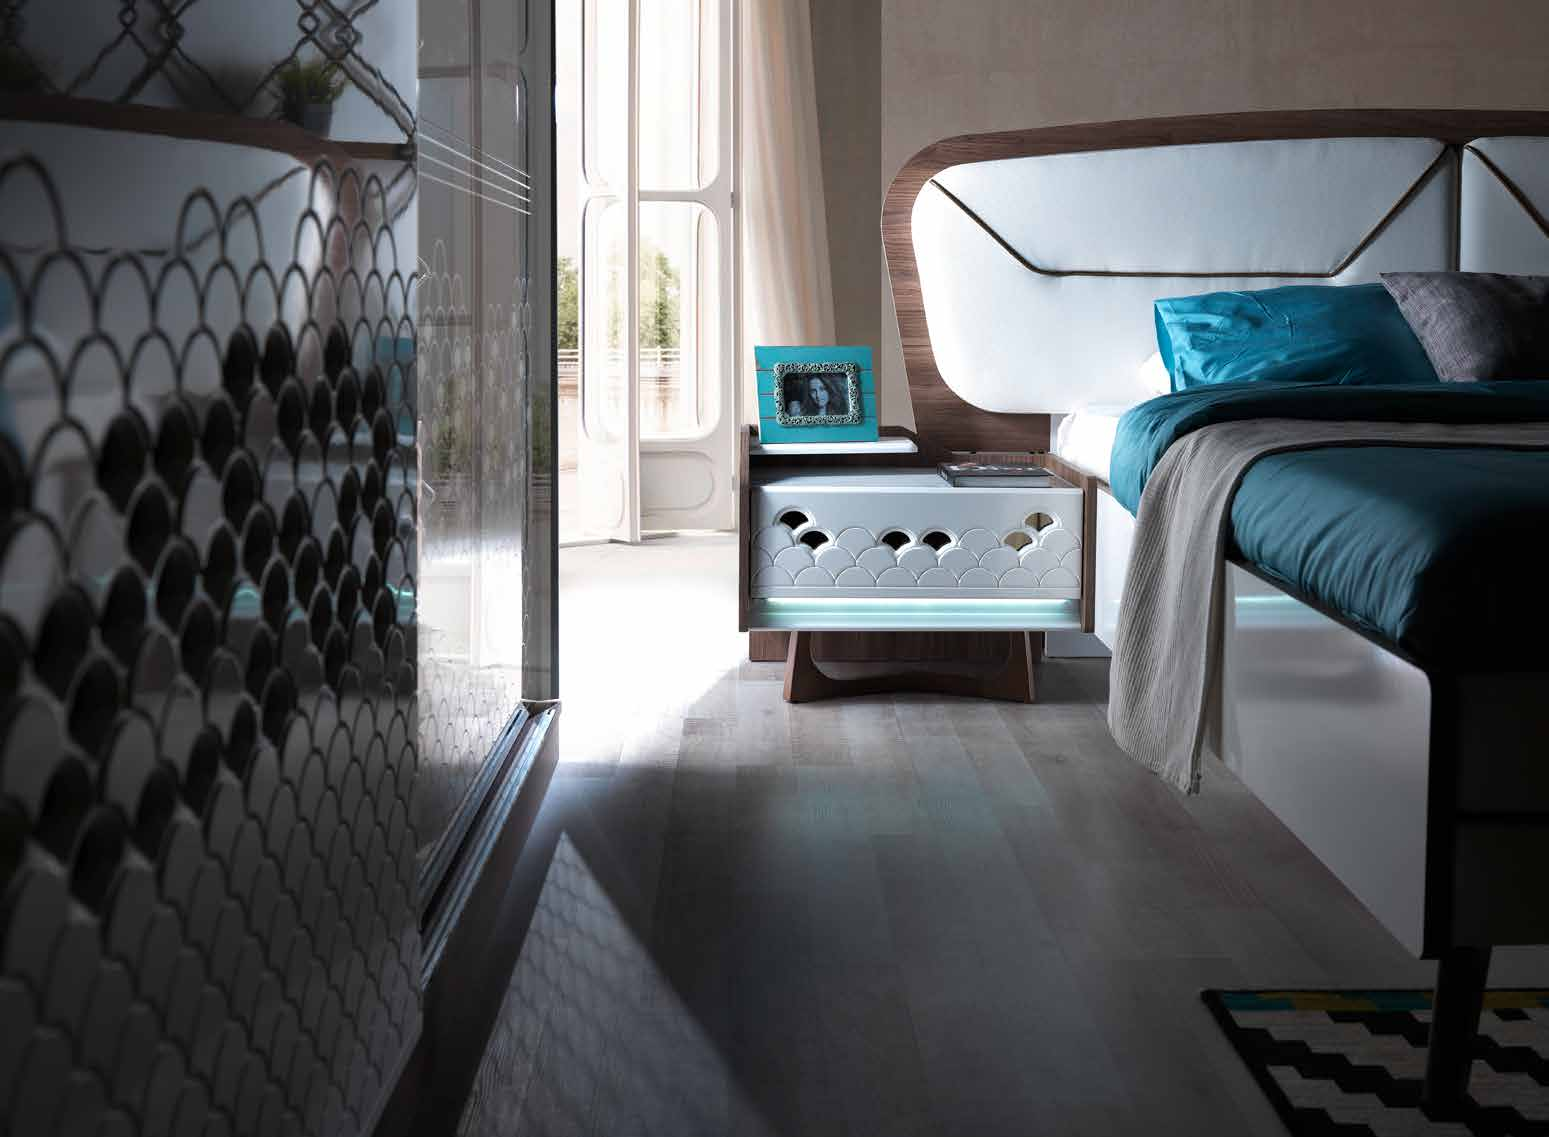 LENA I m a dreamer. My furniture is Lena: a warm and relaxing Mediterranean atmosphere.